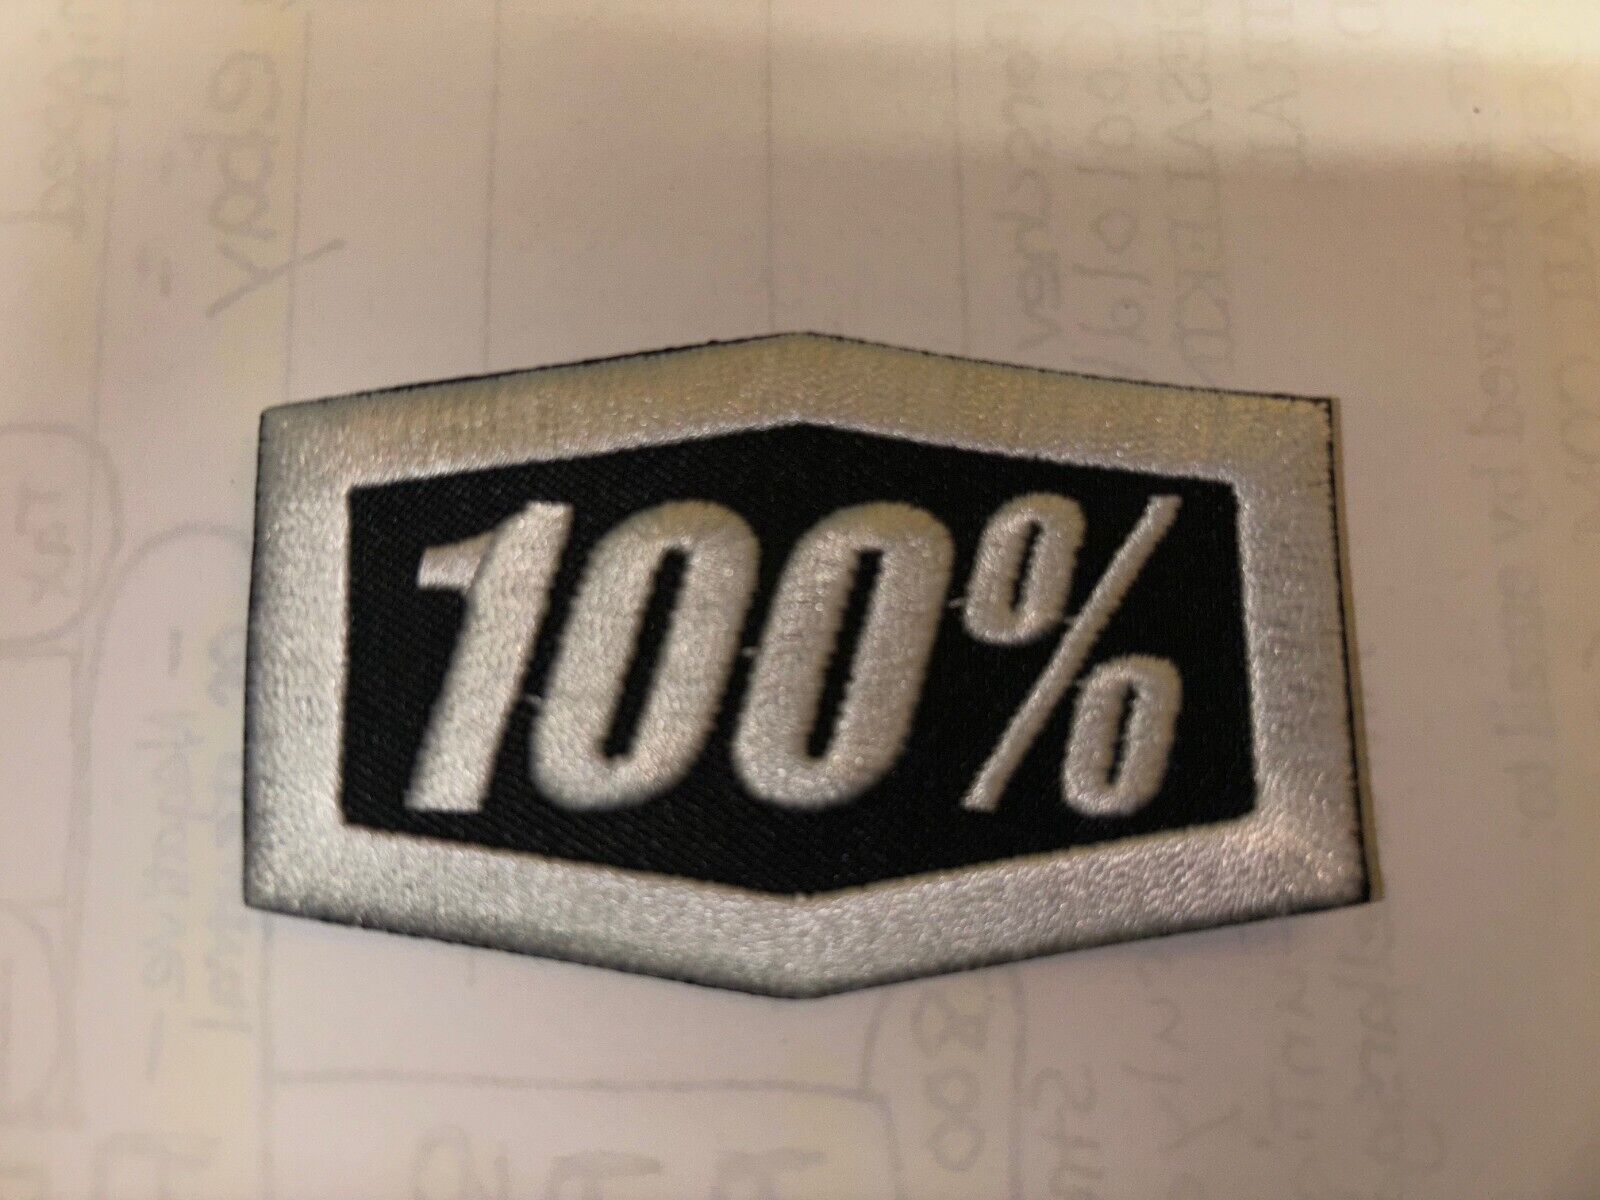 100% One Hundred Percent Embroidered Patch for CLUB JACKET OR HAT SEW ON IRON ON